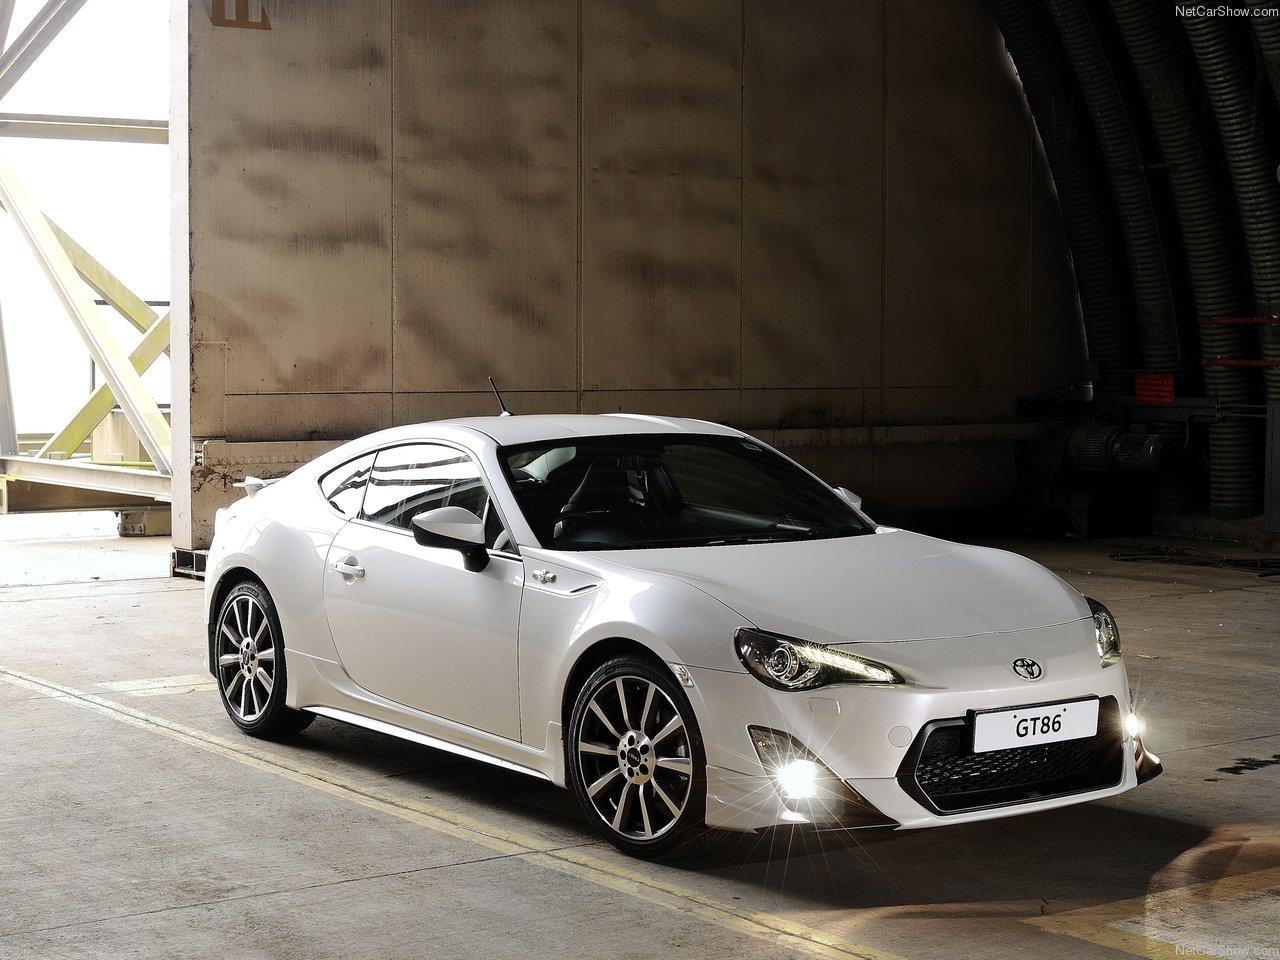 Toyota-GT86 TRD front angle